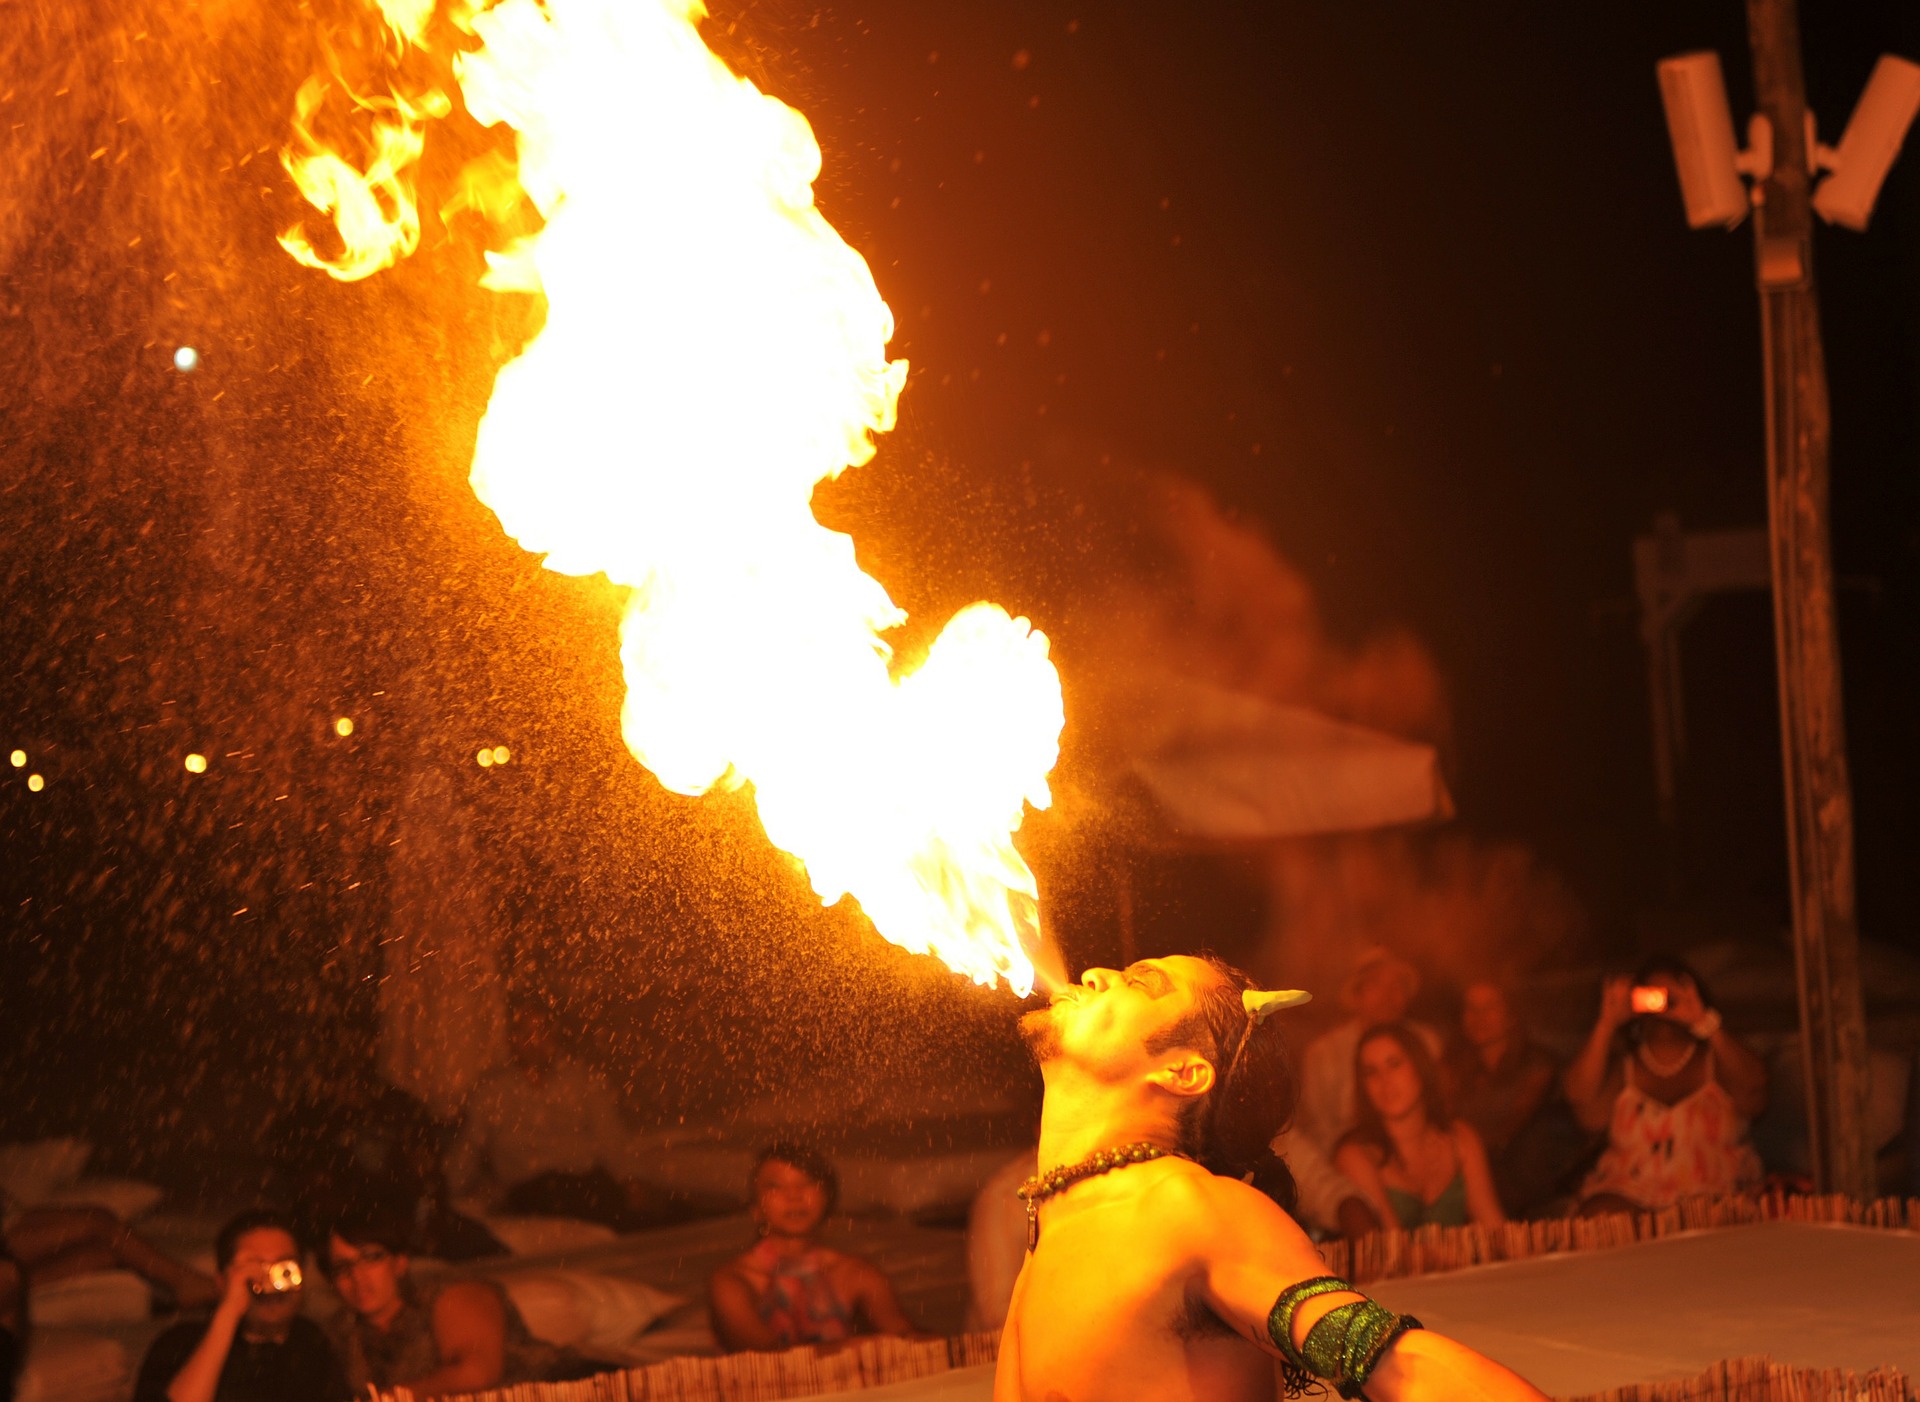 You can enjoy performers putting up entertaining Fire Shows at night